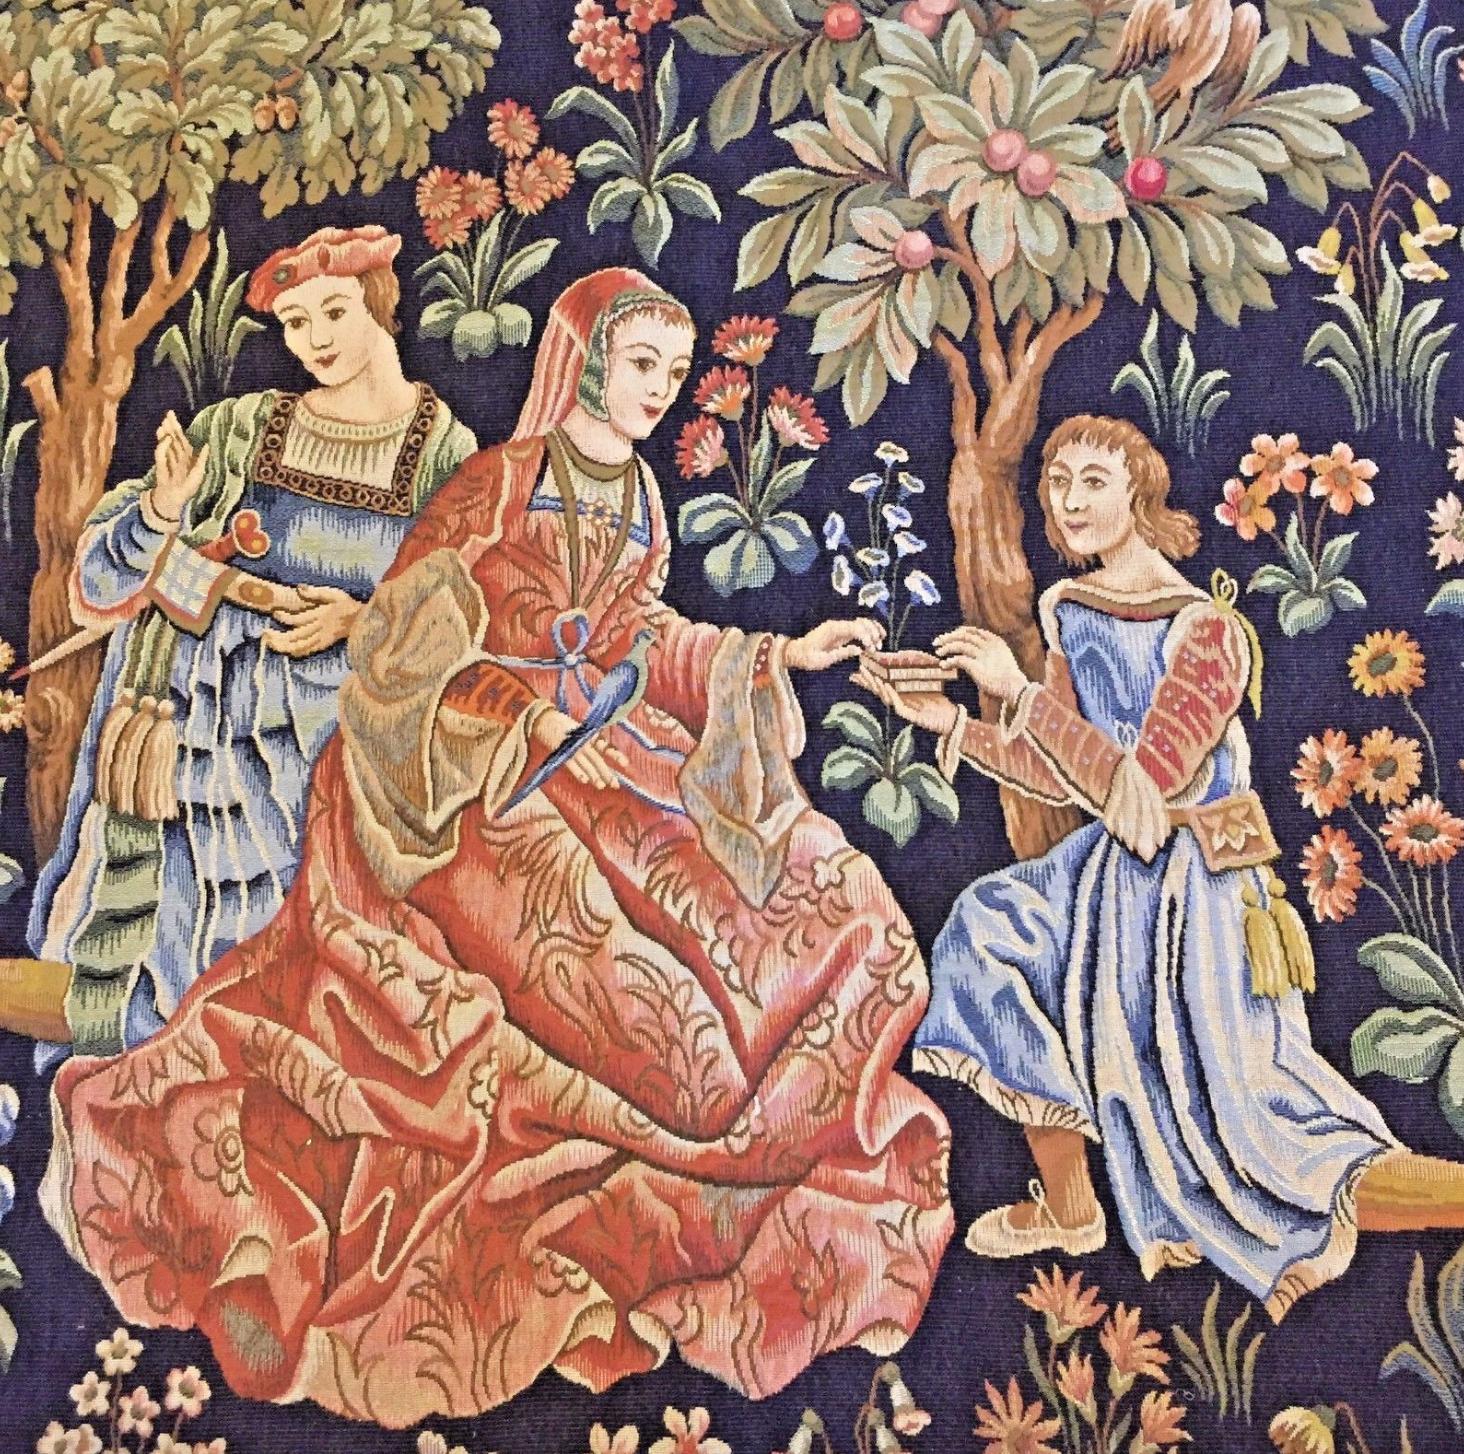 Large tapestry from the beginning of the 20th century based on one from the 17th century.
Excellent condition, beautiful colors. Should last a lifetime.
The back has a pocket to receive a hanging pole or it can be hung with metal